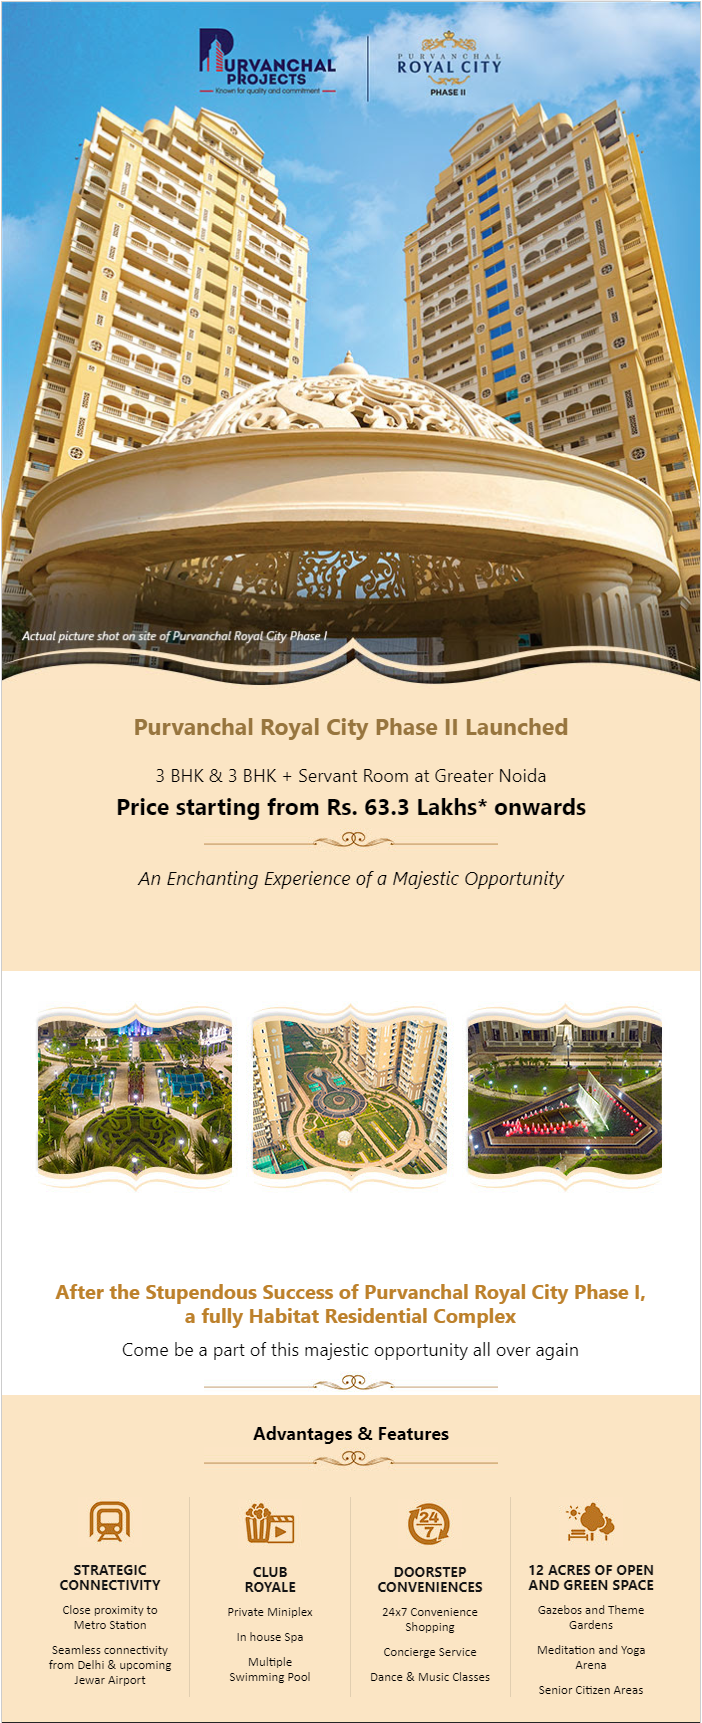 Launching 3 BHK + Servant Room at Rs. 63.3 lakhs at Purvanchal Royal City Phase 2 in Greater Noida Update